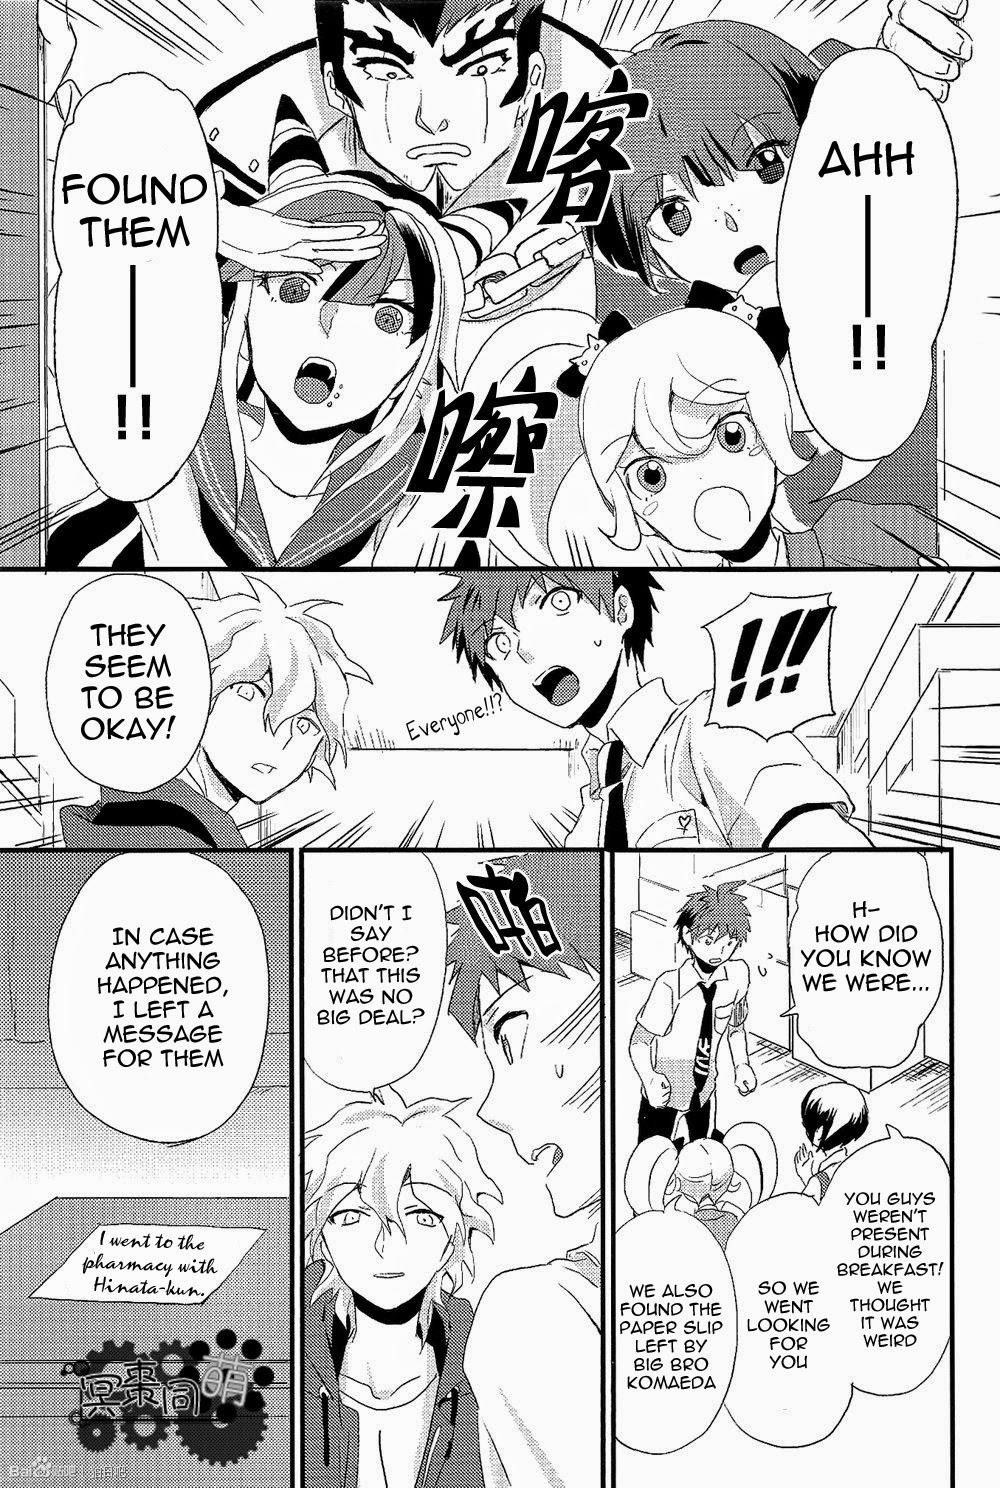 Butts The Island’s Secret Room - Danganronpa Shemales - Page 31